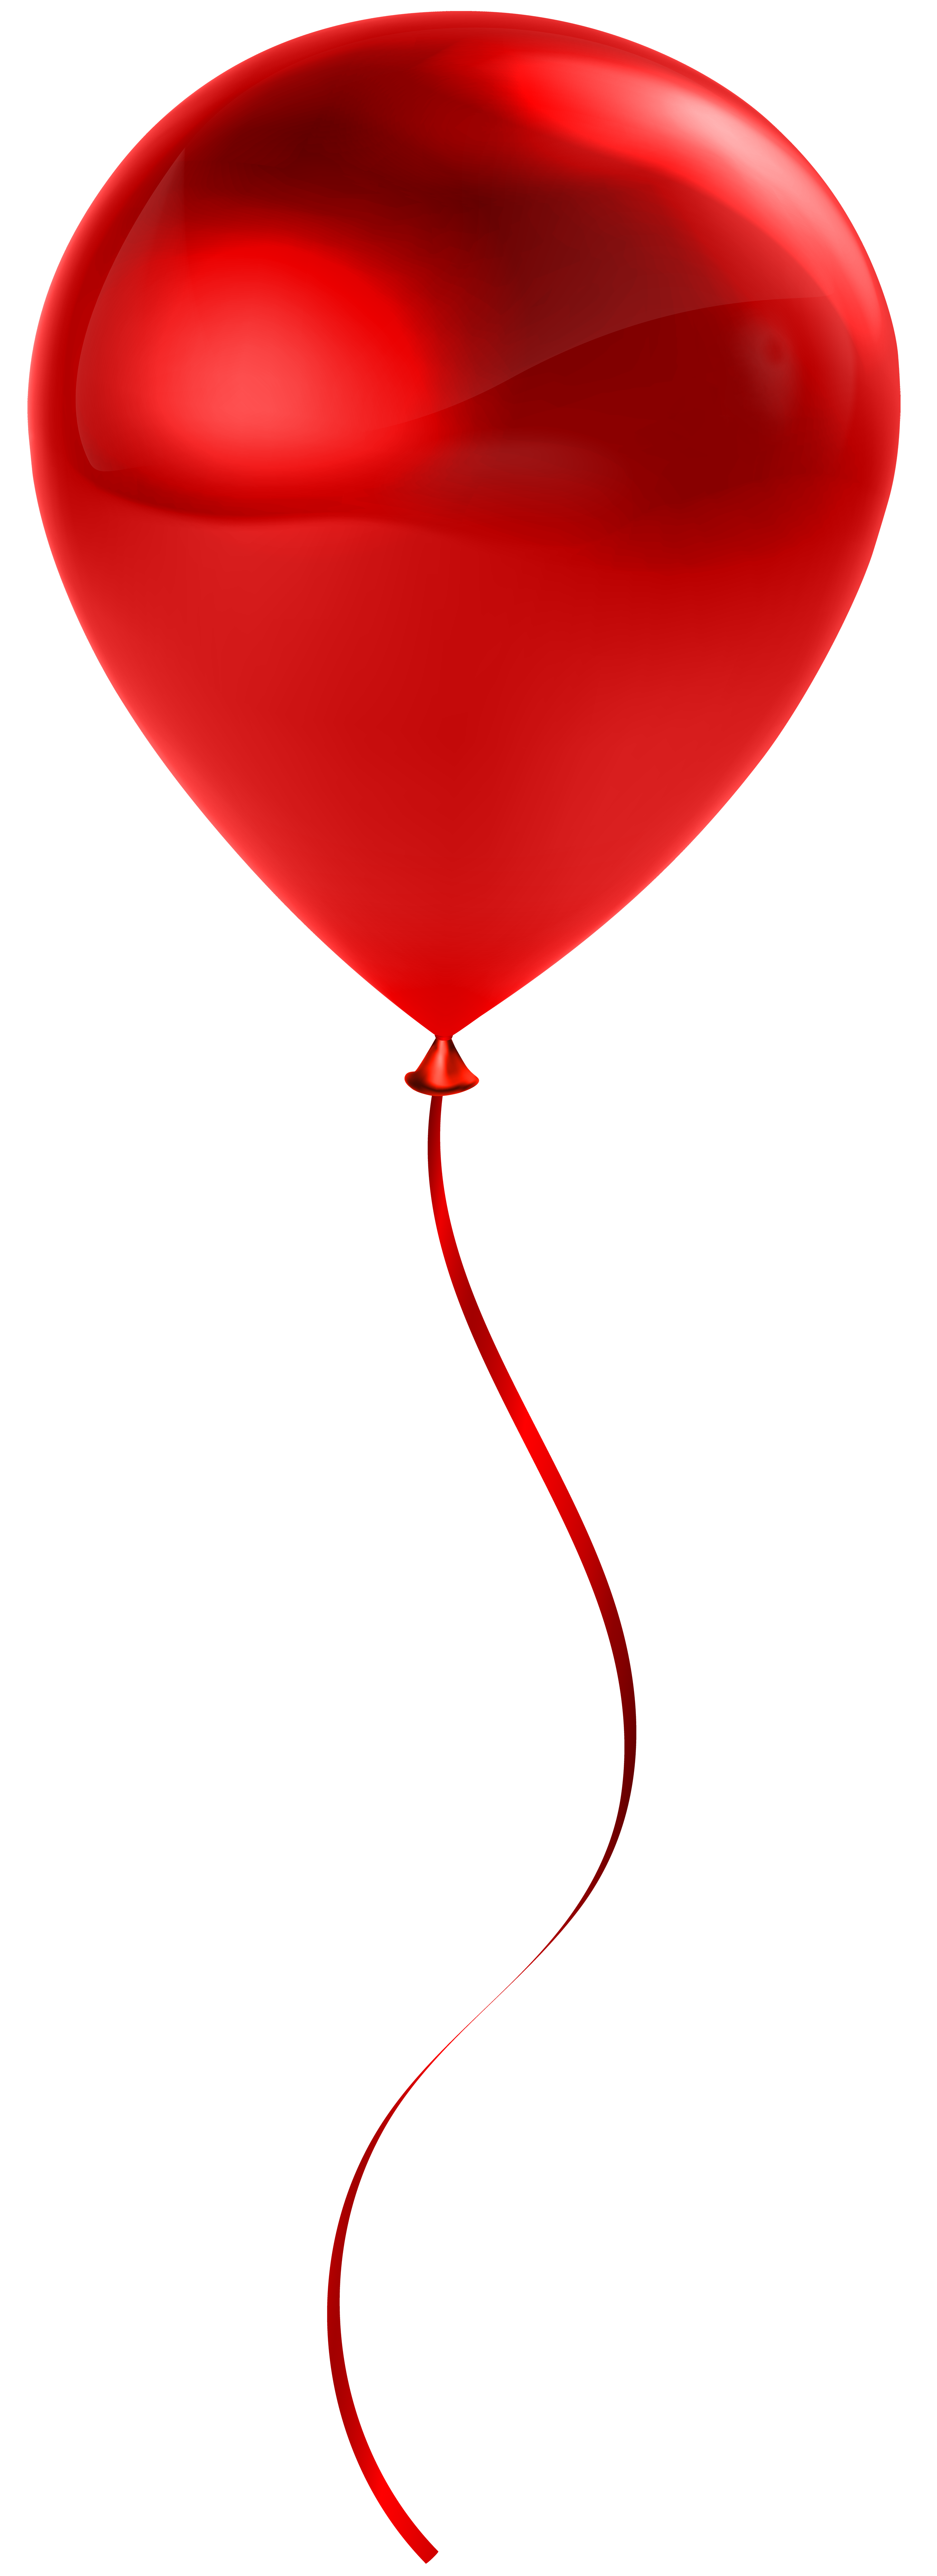 Balloon PNG Image Background